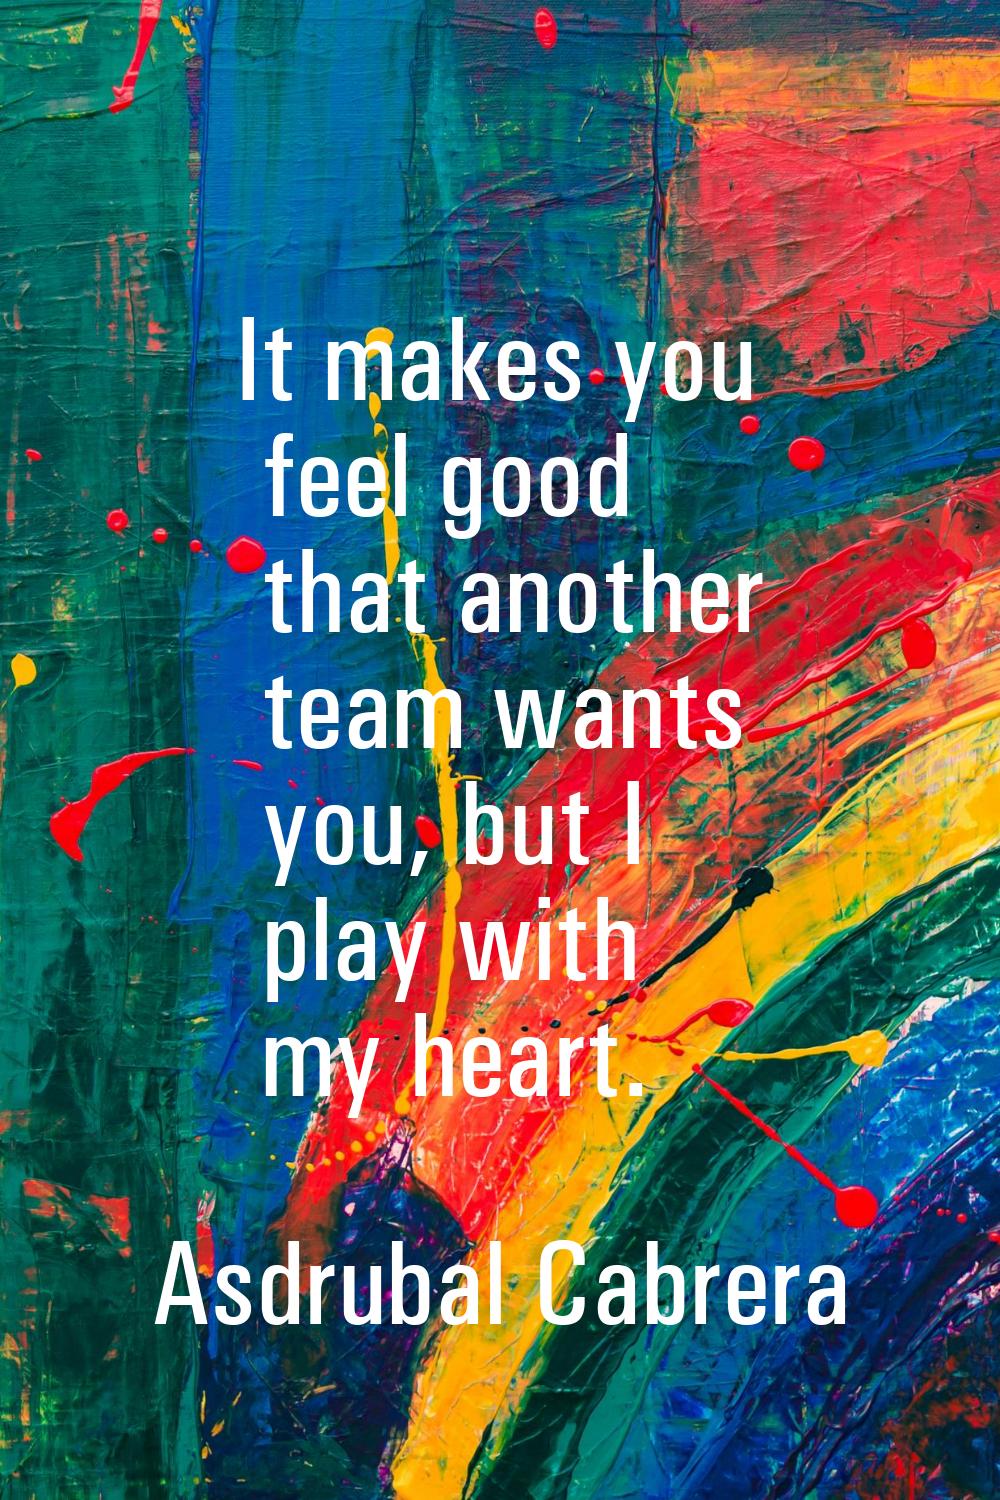 It makes you feel good that another team wants you, but I play with my heart.